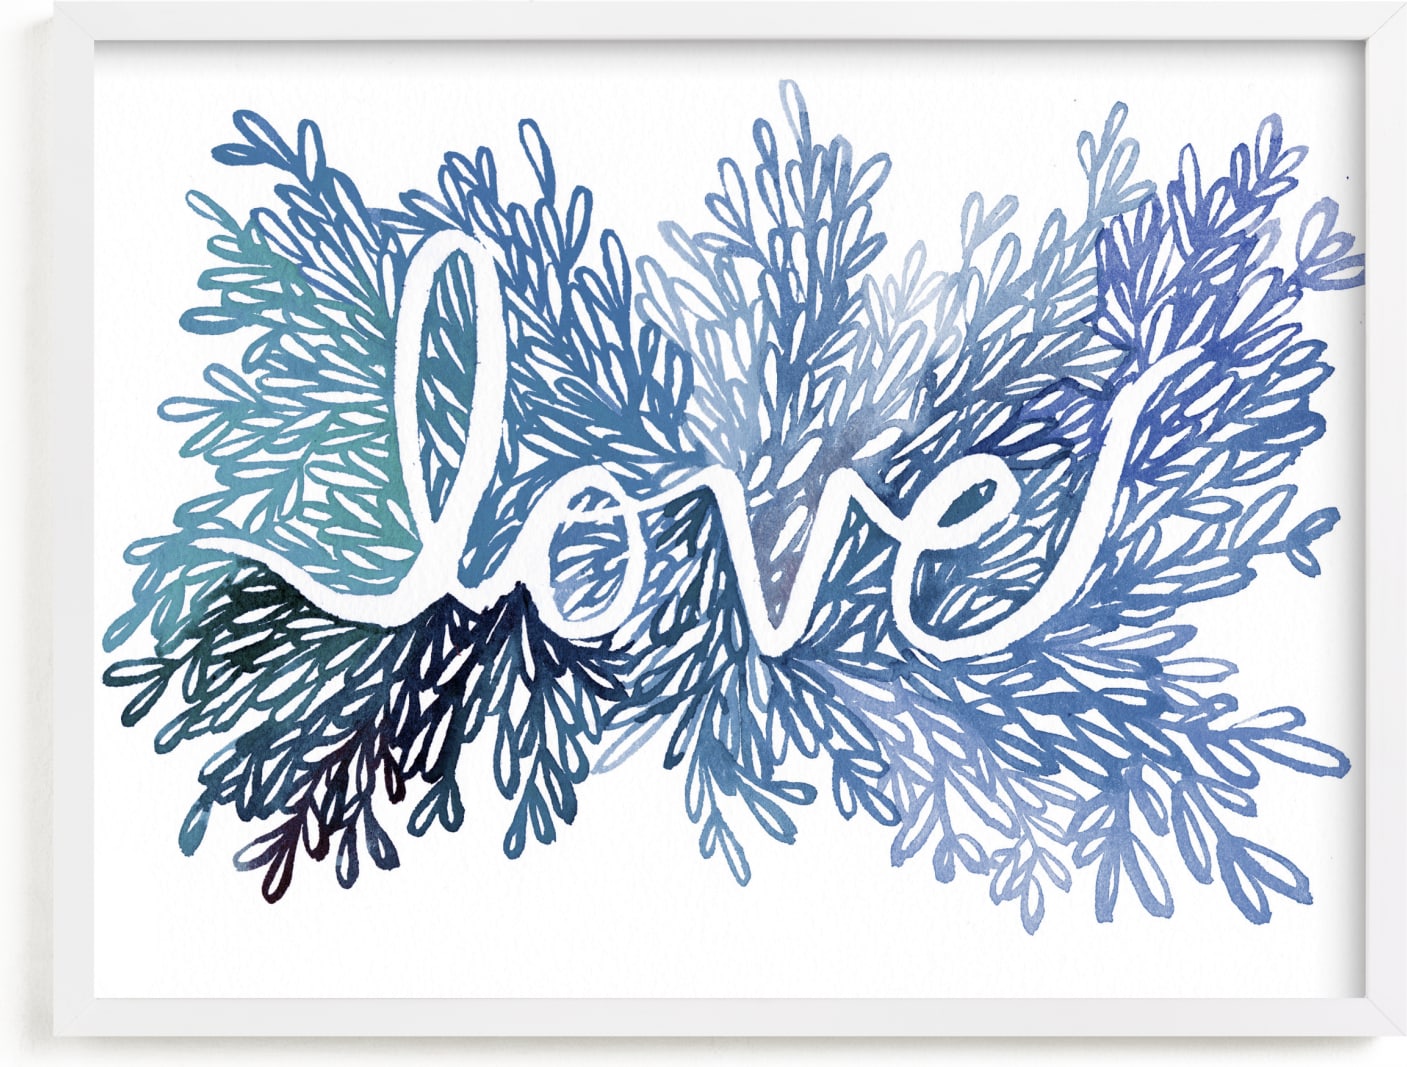 This is a blue art by Kelly Ventura called Love.